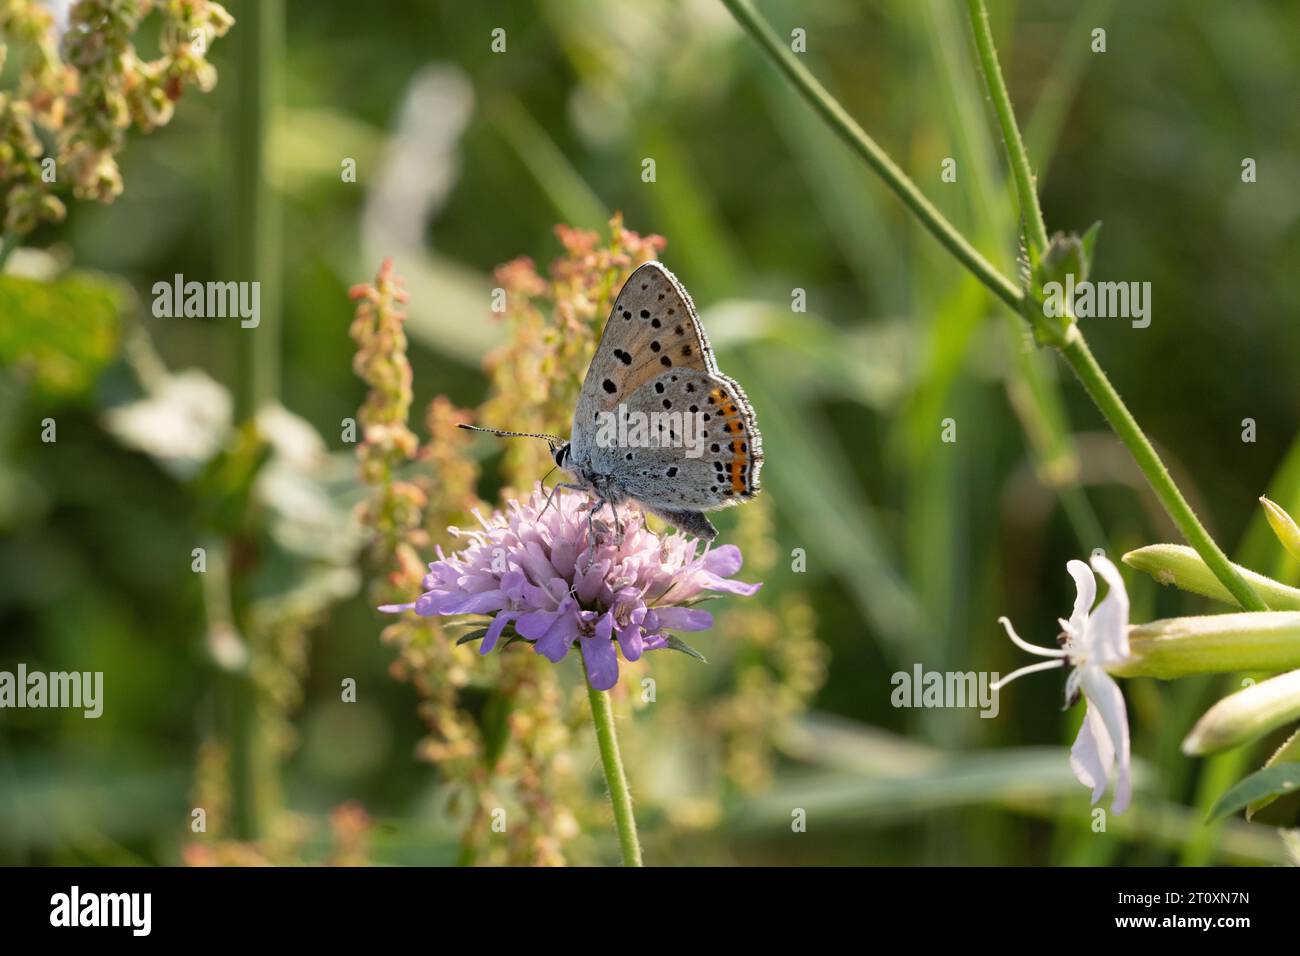 Čiobrelinis auksinukas Lycaena alciphron Family Lycaenidae Genus Lycaena Purple-shot copper butterfly wild nature insect photography, picture, wallpap Stock Photo